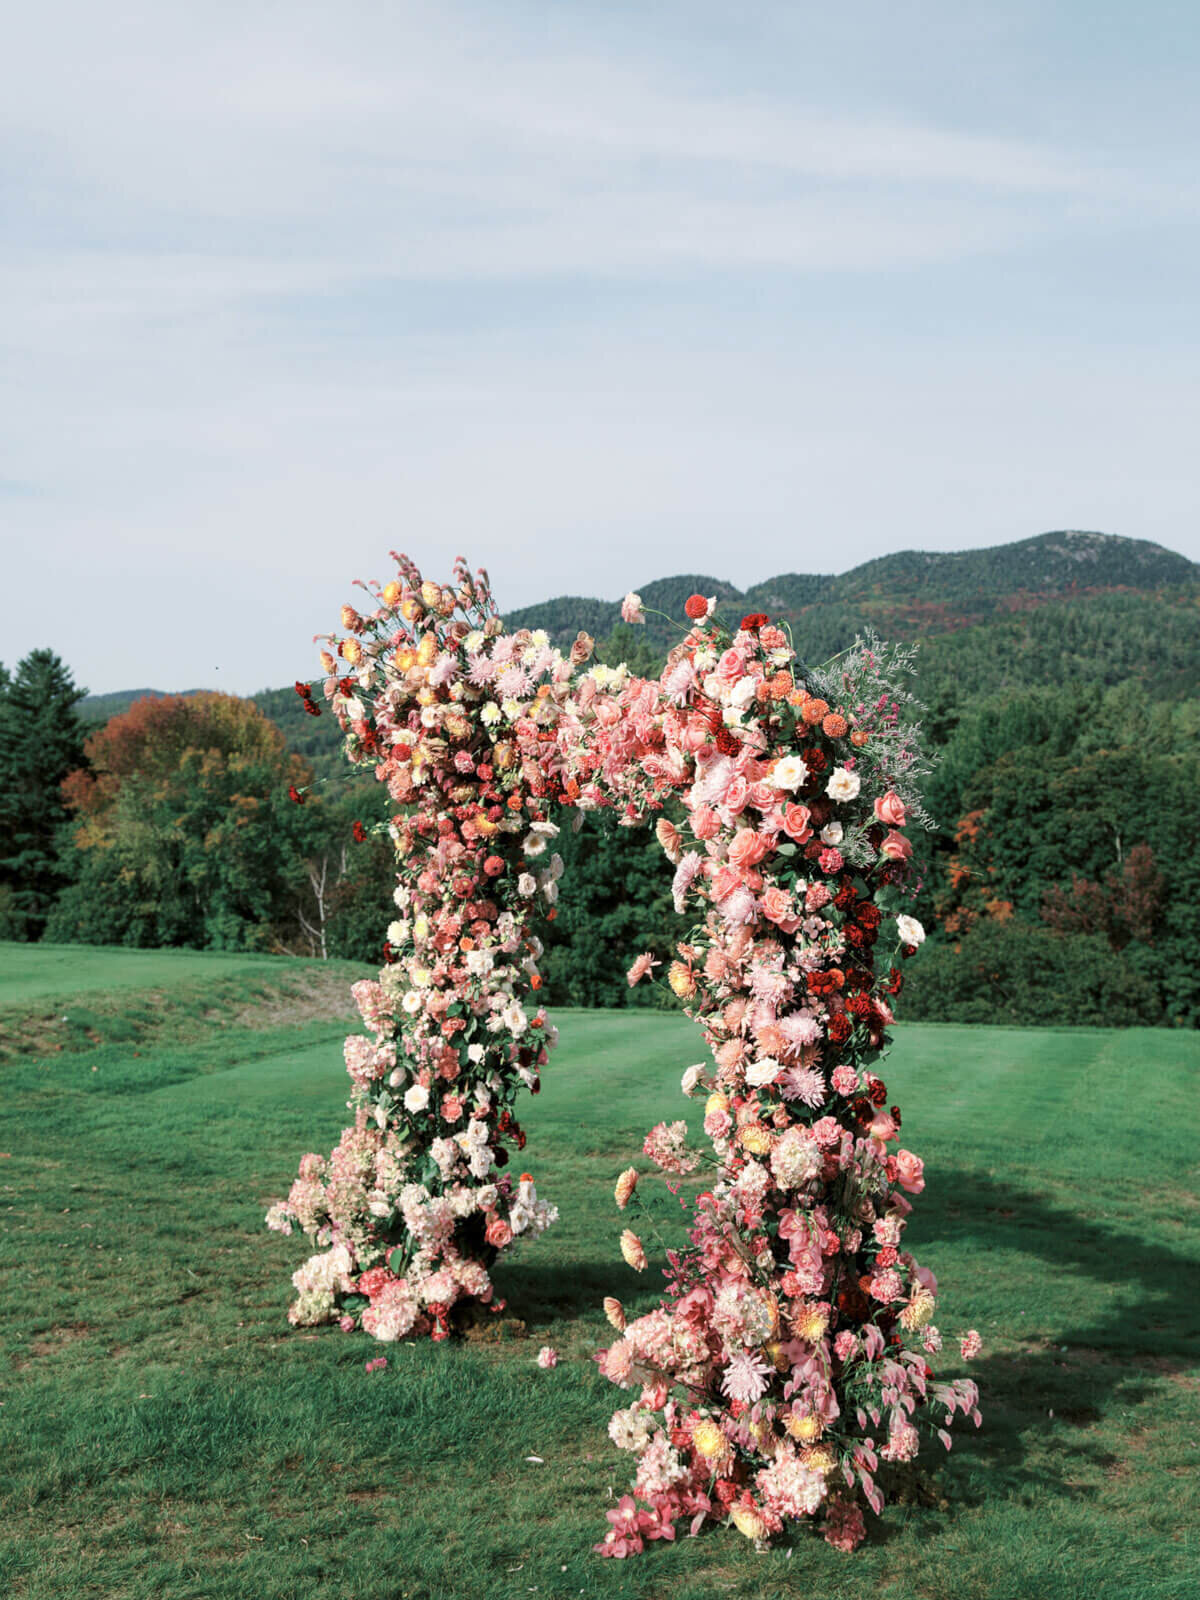 A beautiful wedding arch outdoors filled with flowers of peach, pink, red, and white hues. Image by Jenny Fu Studio.